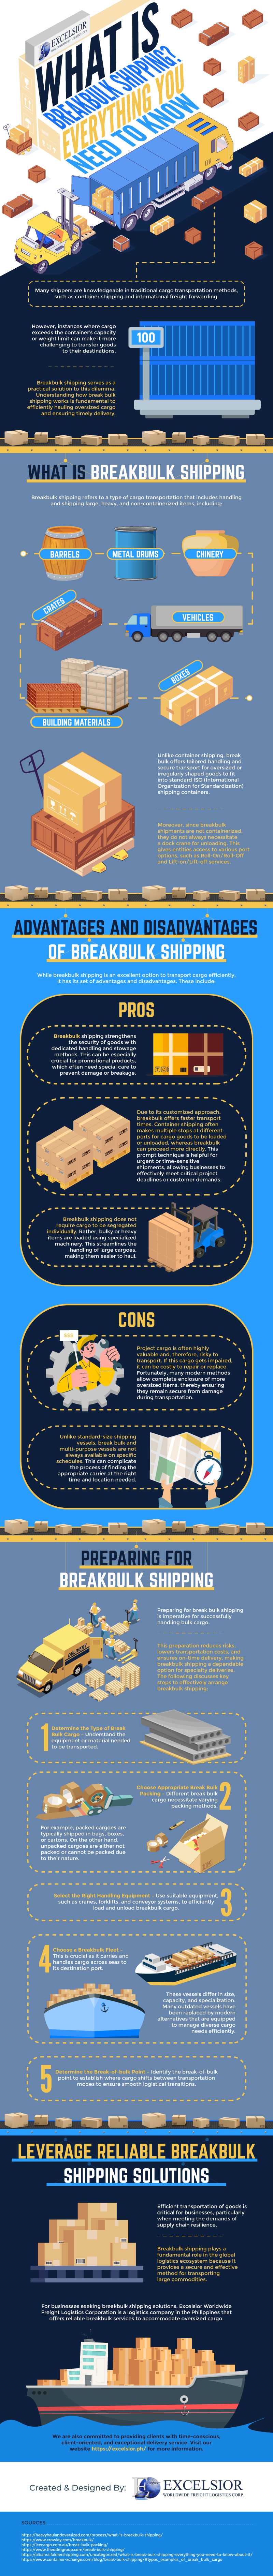 What is Breakbulk Shipping? Everything You Need to Know! Infographic Image 0005